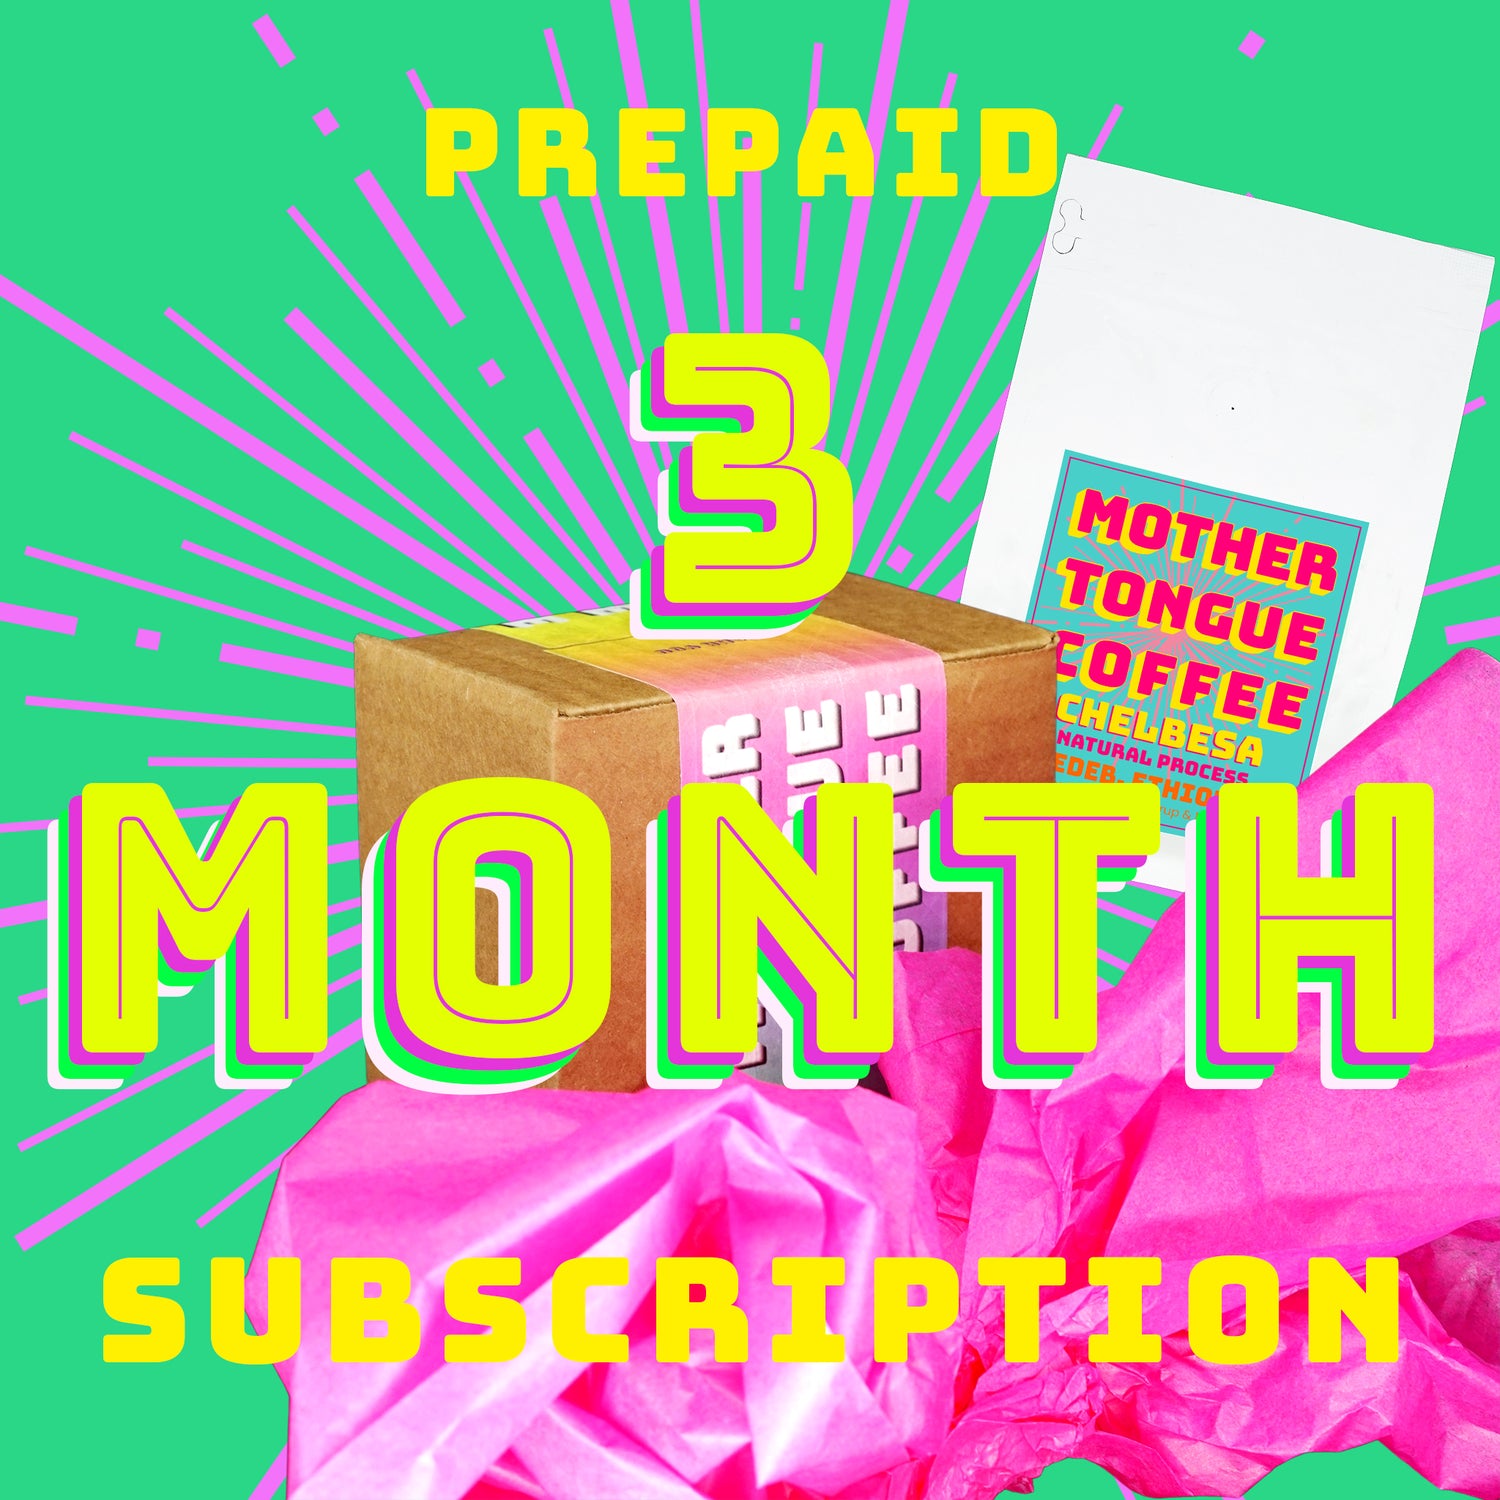 3 MONTH SUBSCRIPTION - prepaid - Mother Tongue Coffee